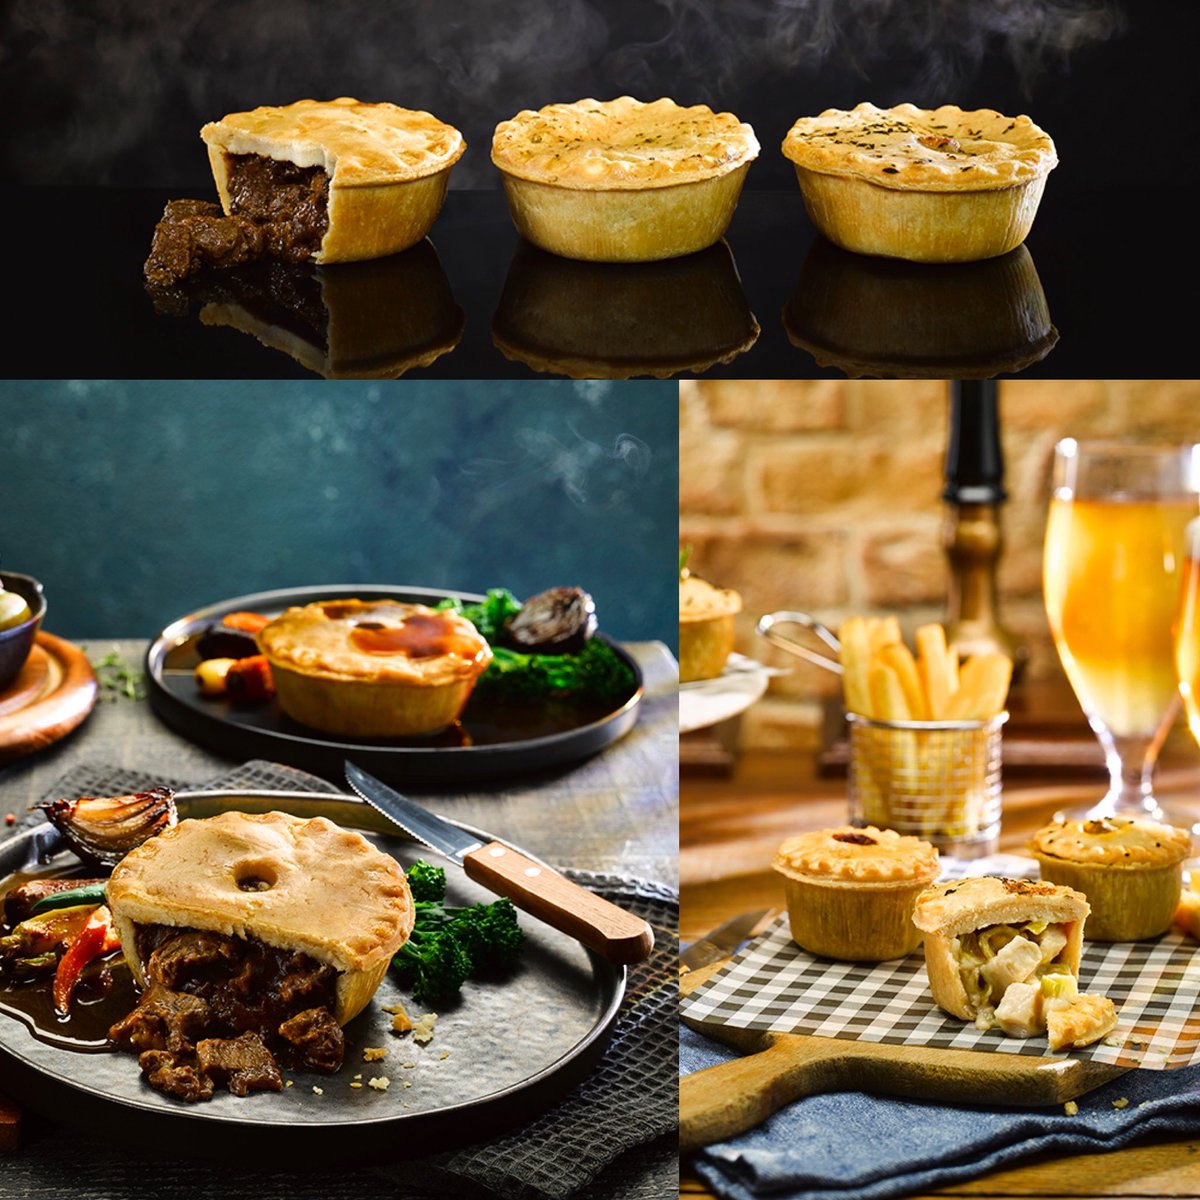 Our New Gluten Free range launched into Foodservice - now everyone can enjoy a Phat Pie #glutenfree #pies #freefrom #eatwellhavefun #coeliac